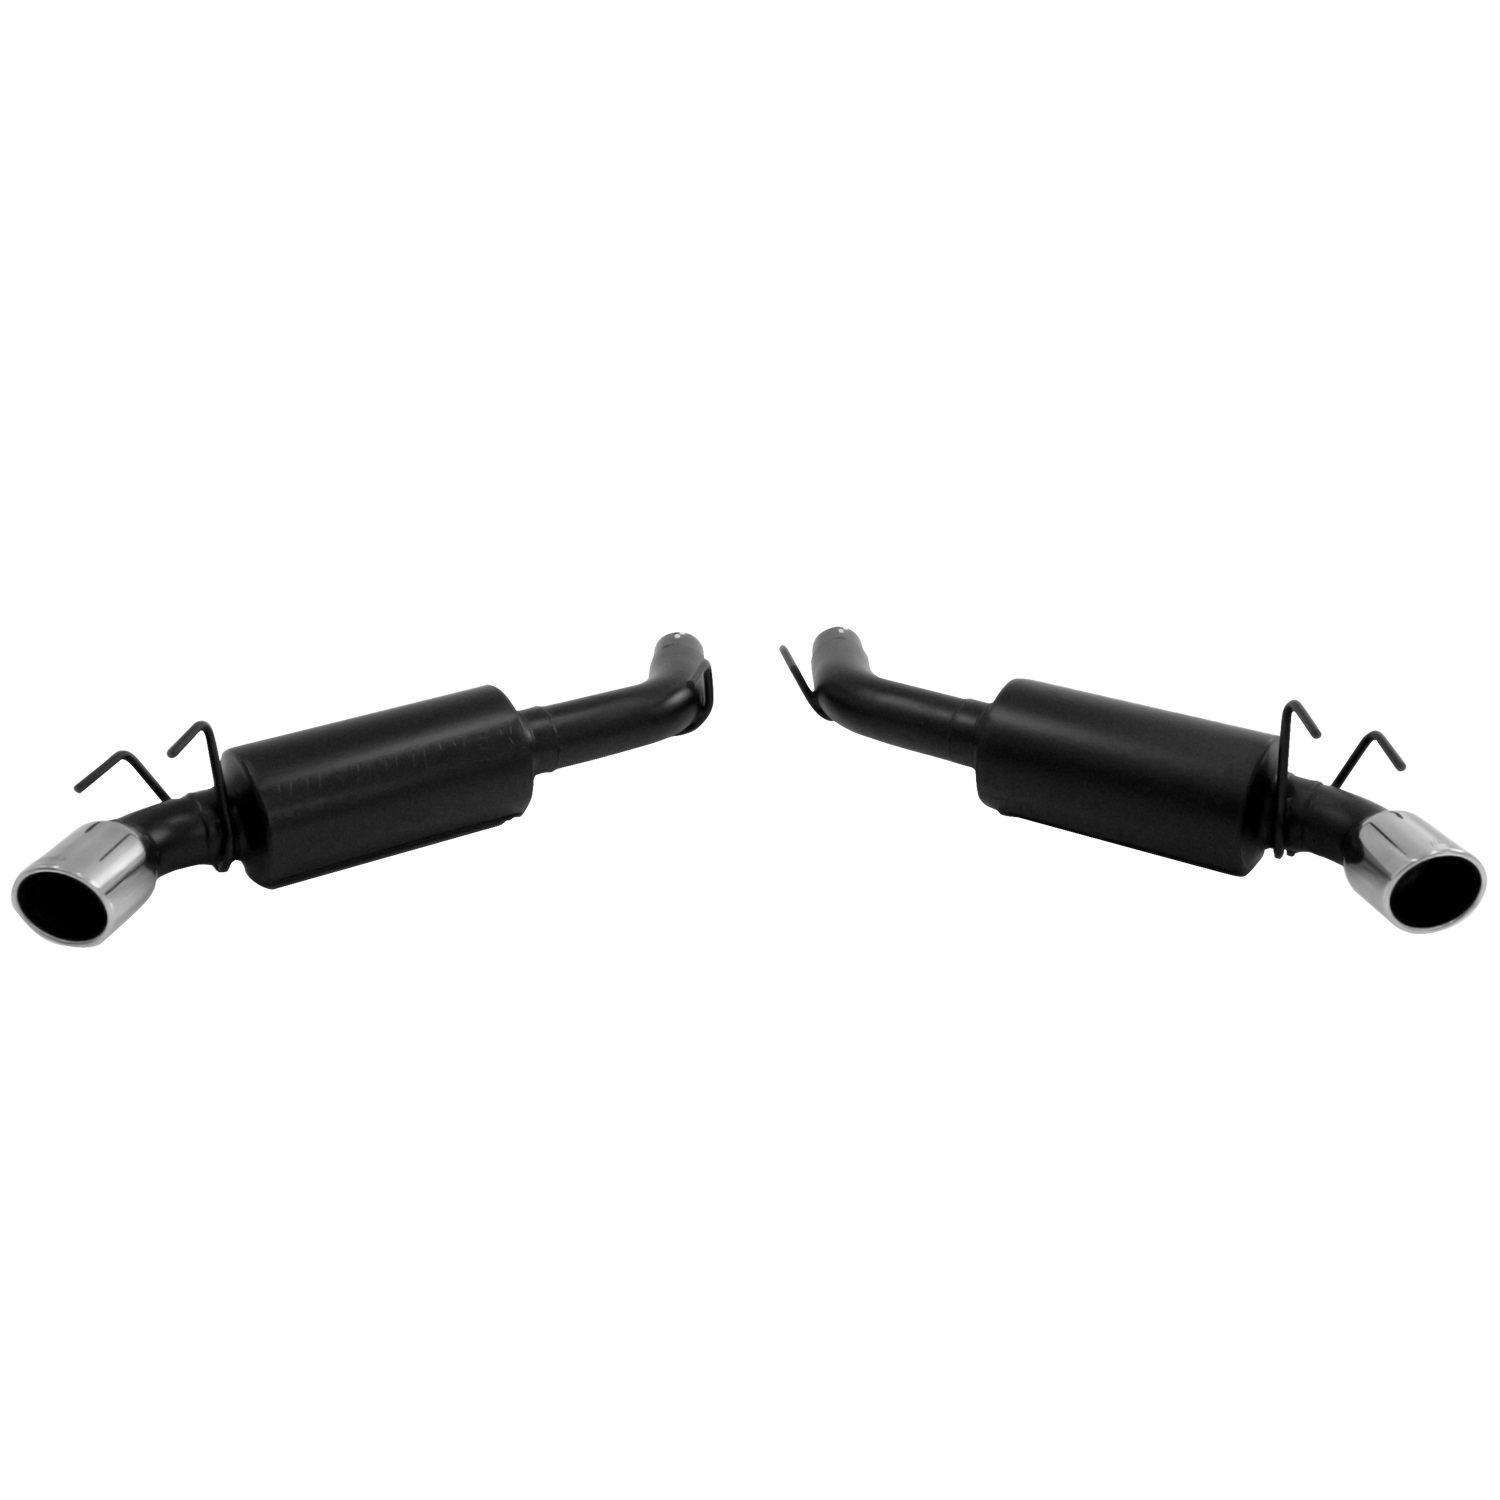 Flowmaster Flowmaster 819107 Pro Series Axle Back Exhaust System Fits 10-13 Camaro